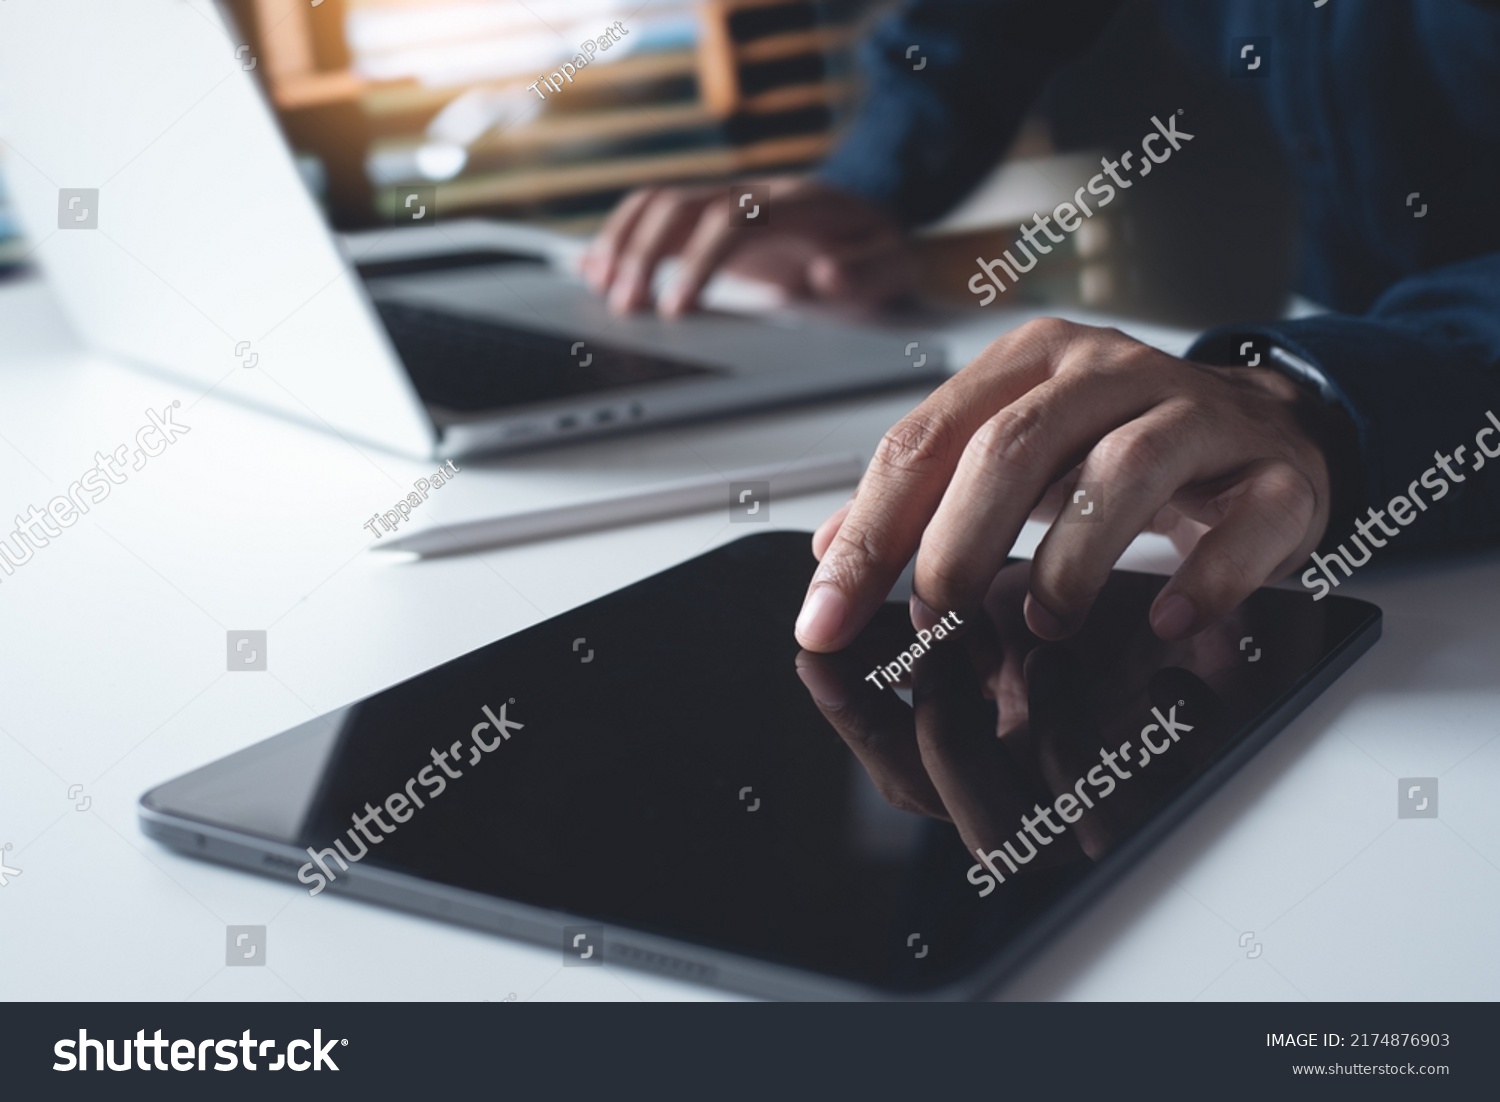 Man using digital tablet, working on laptop computer on office table. Casual business man touching on tablet screen, surfing the internet, online job, freelance at work, close up #2174876903